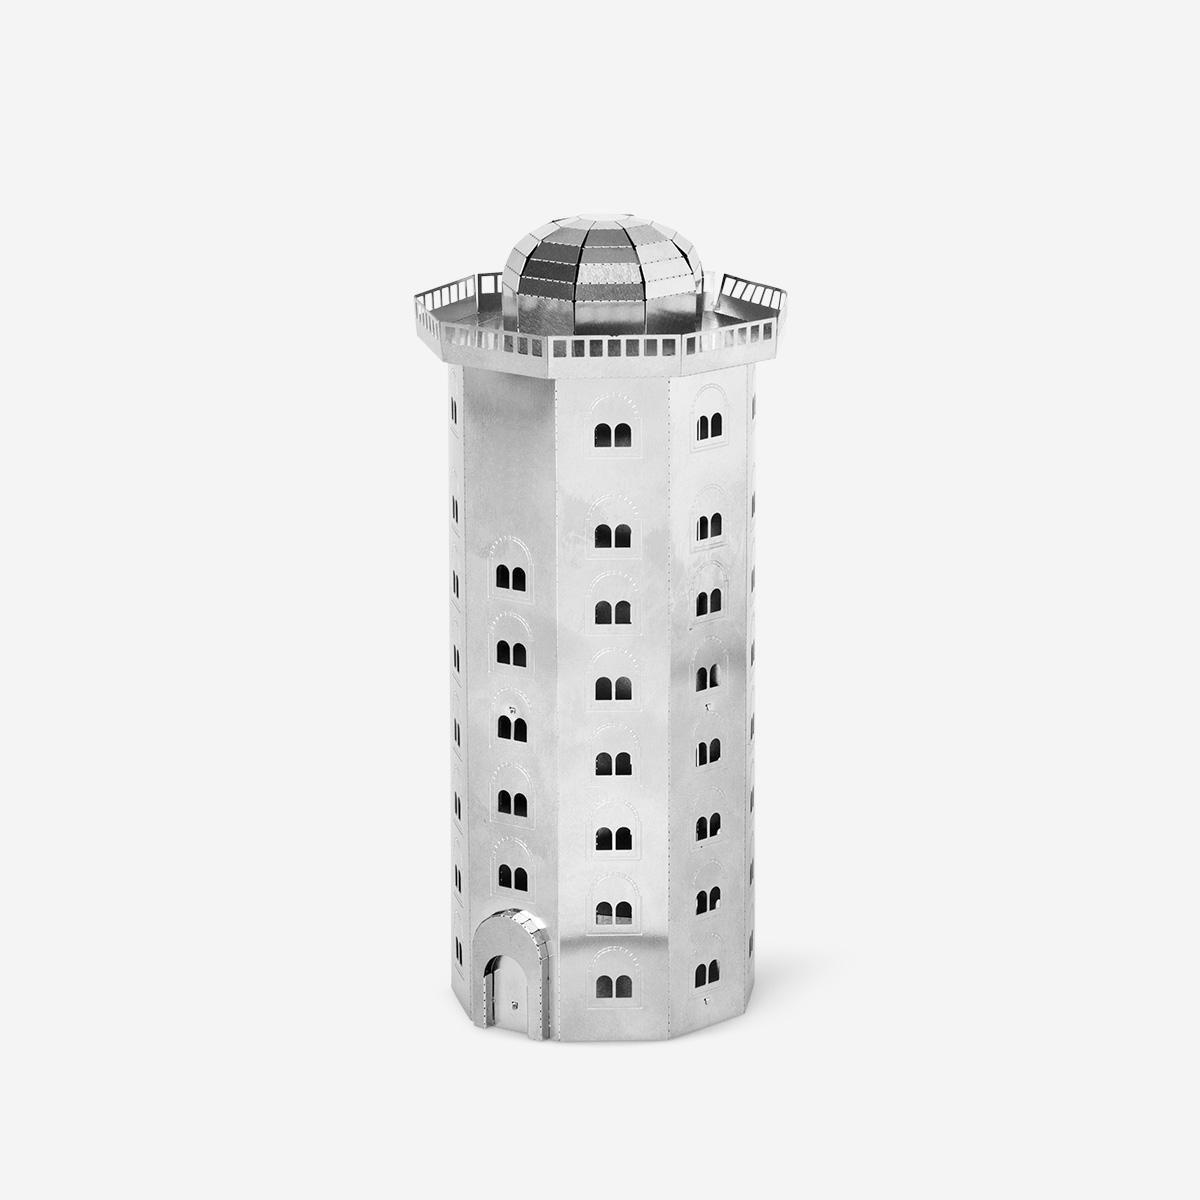 Silver the round tower. build your own